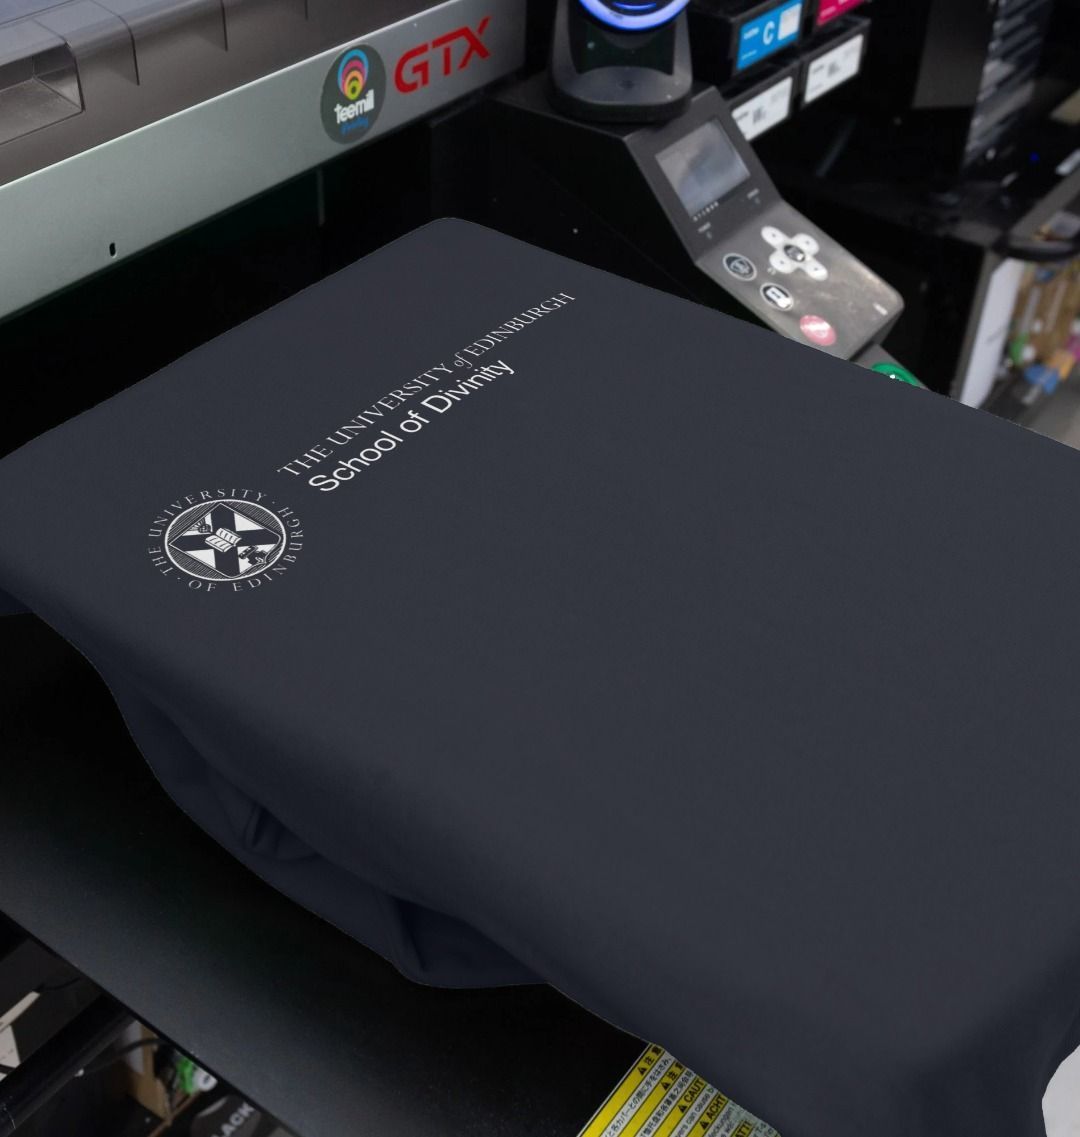 Our School of Divinity Sweatshirt being printed by our print on demand partner, teemill.